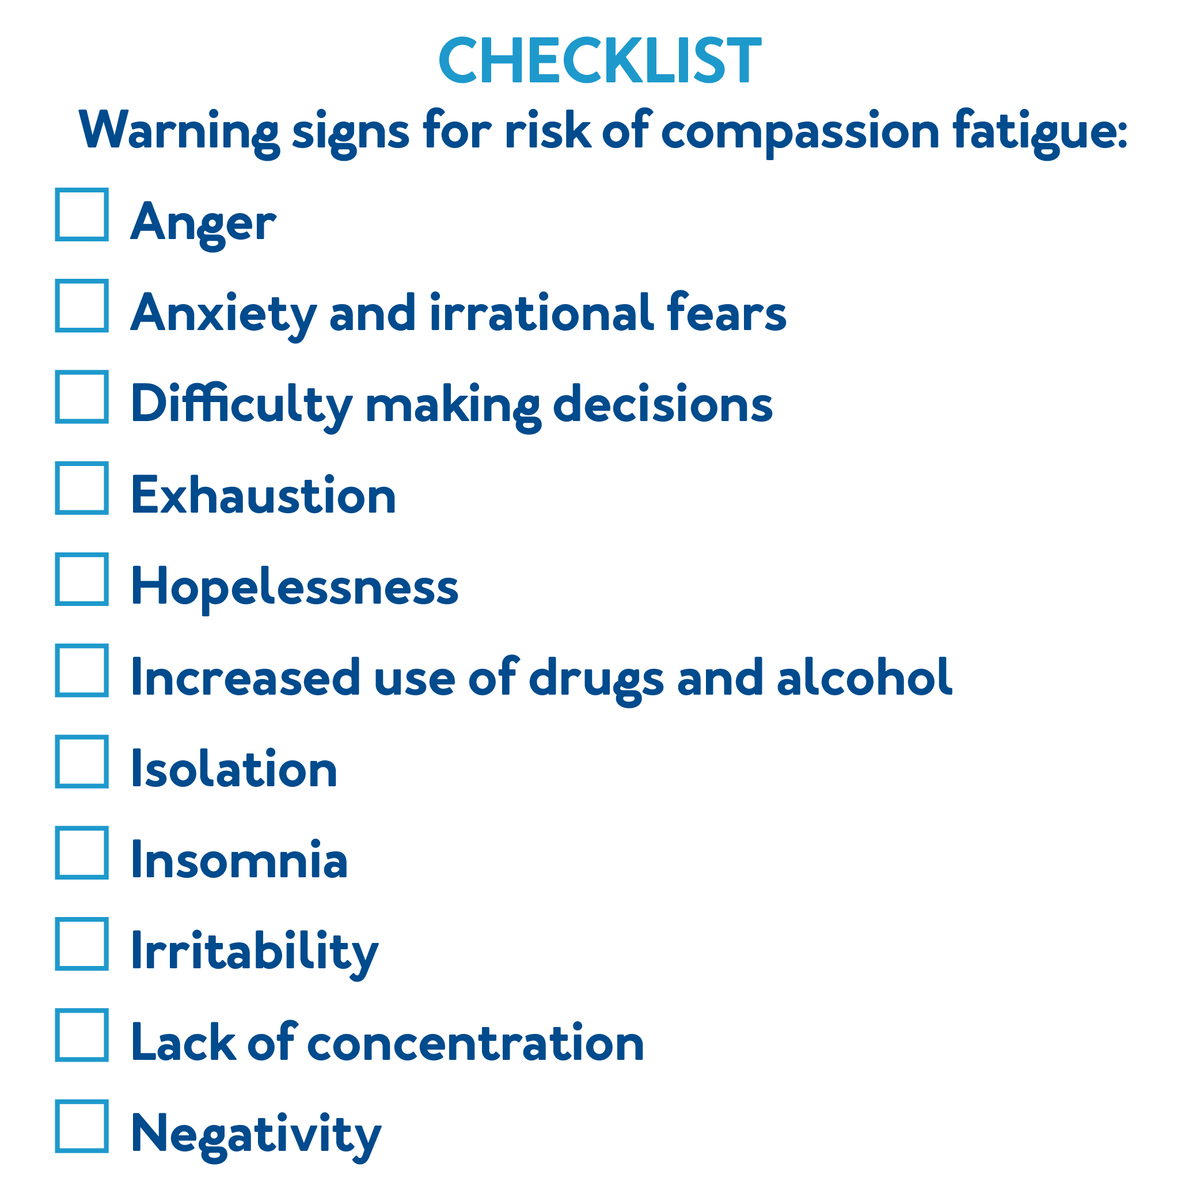 checklist Warning signs for risk of compassion fatigue, further details are provided next to image.